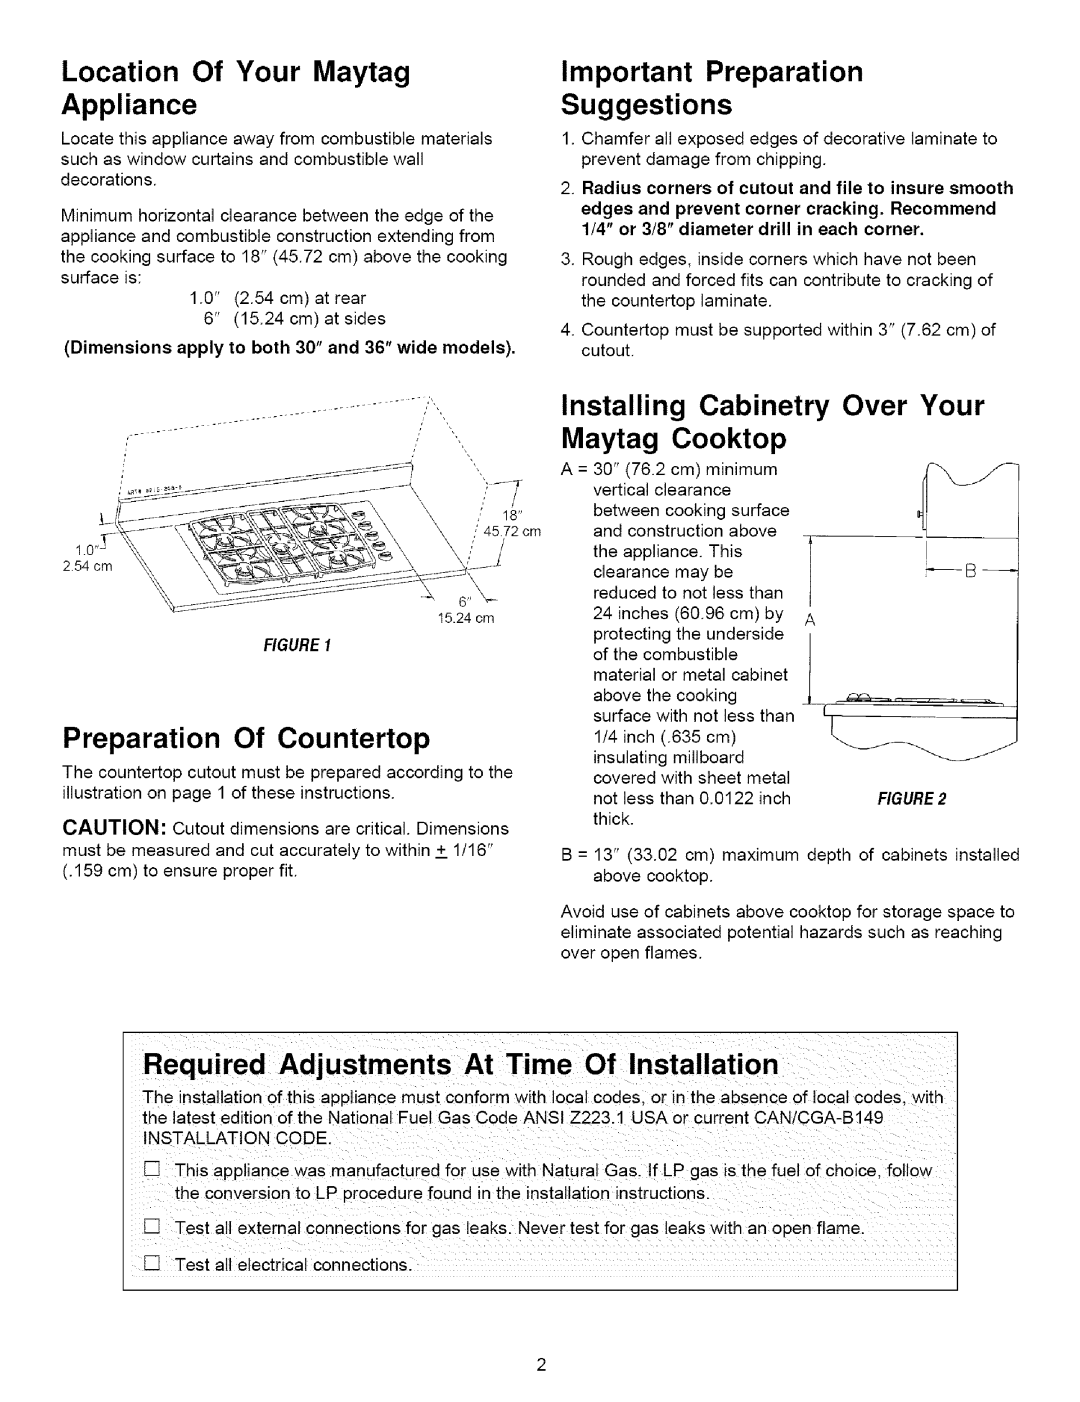 Maytag MGC6430, MGC6536 Location Of Your Maytag Appliance, Important Preparation Suggestions, Preparation Of Countertop 